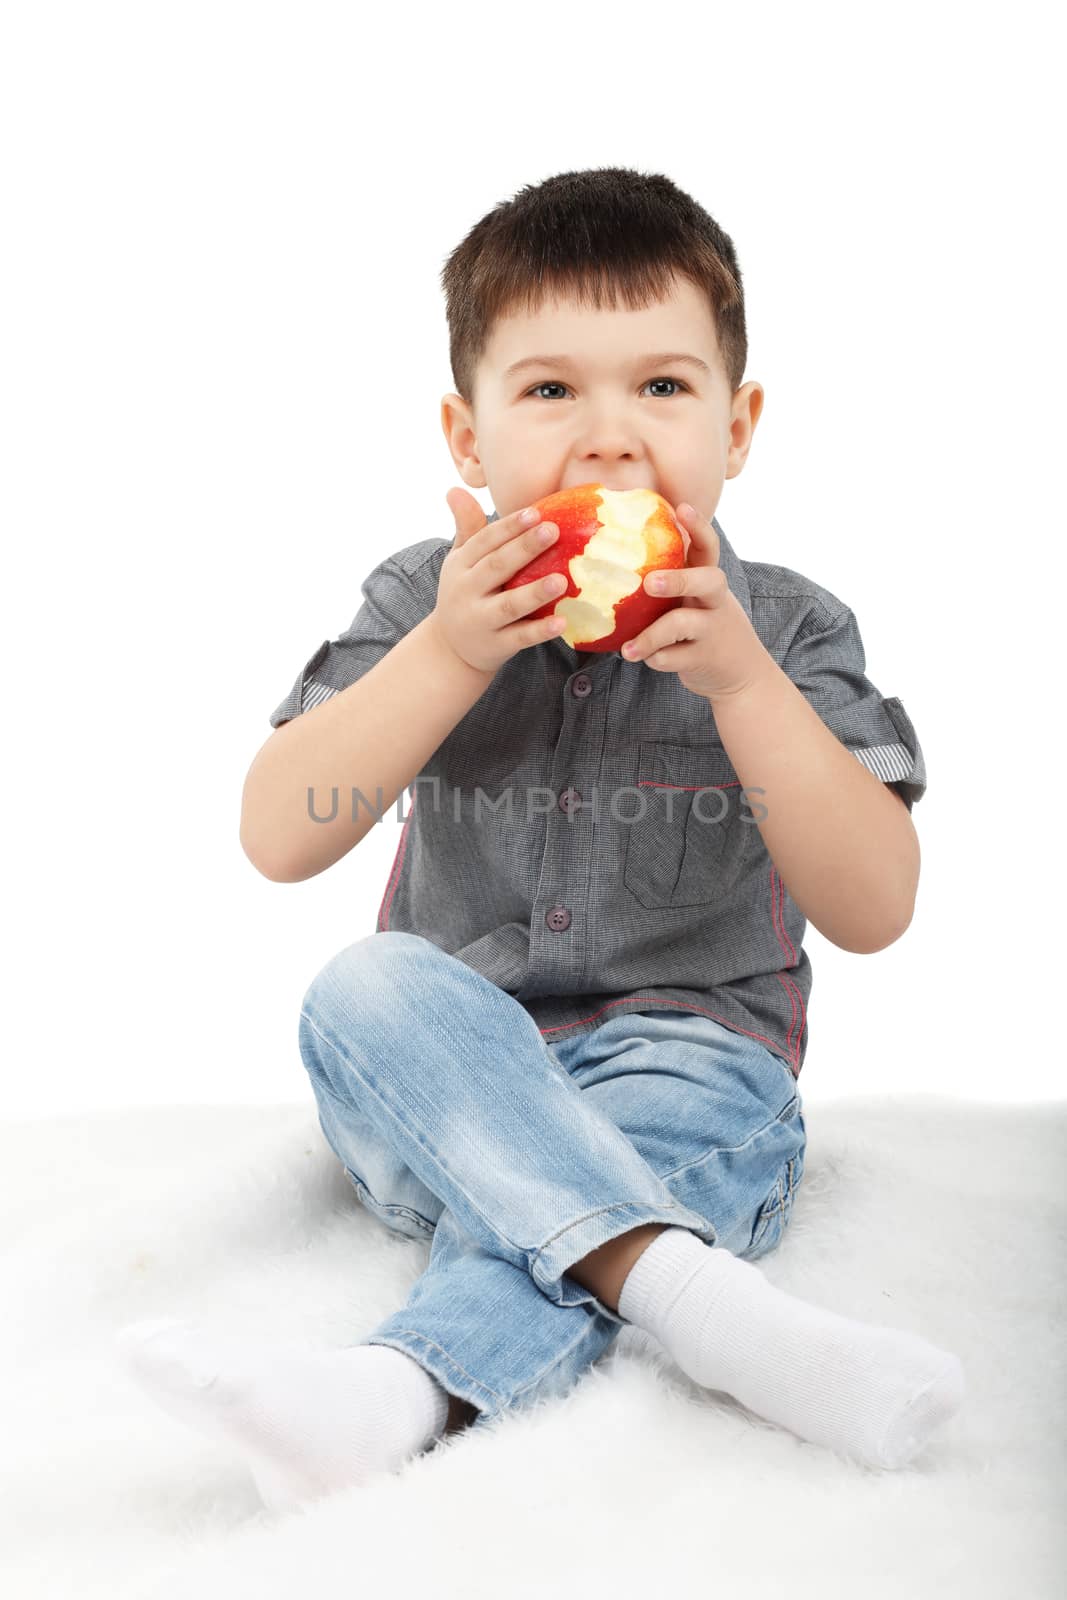 Little boy eating a red apple isolated on white background